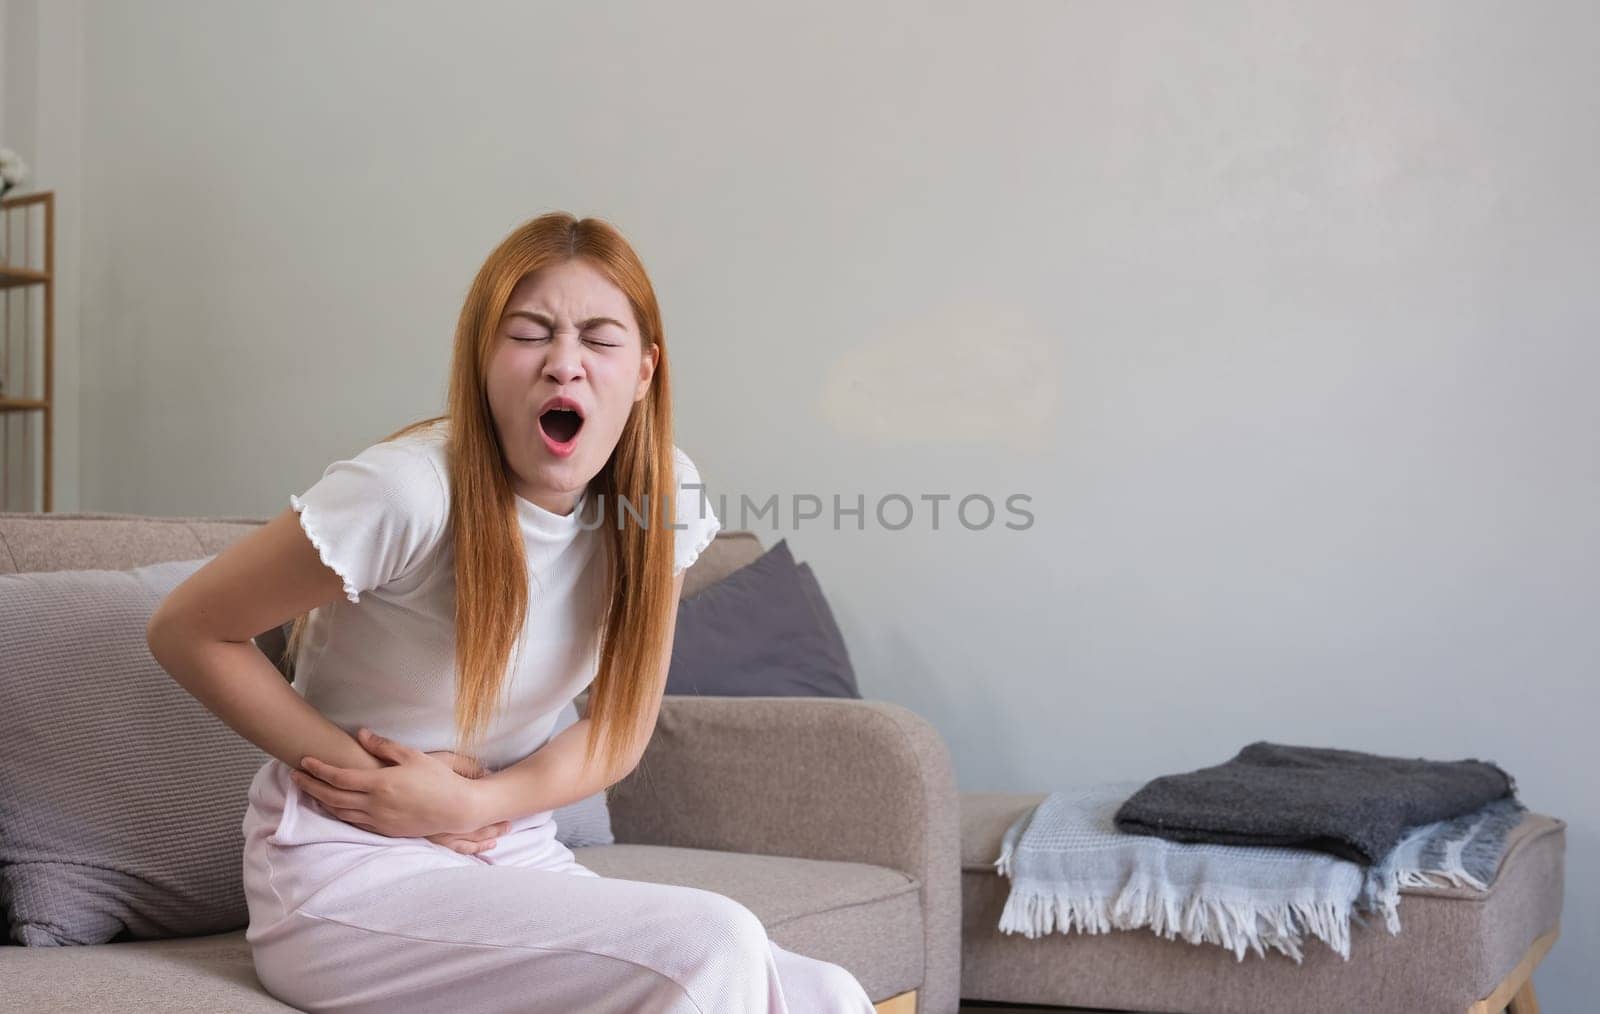 A young woman with stomach pain from diarrhea or menstrual cramps felt sick and touched her stomach with an unhappy expression..